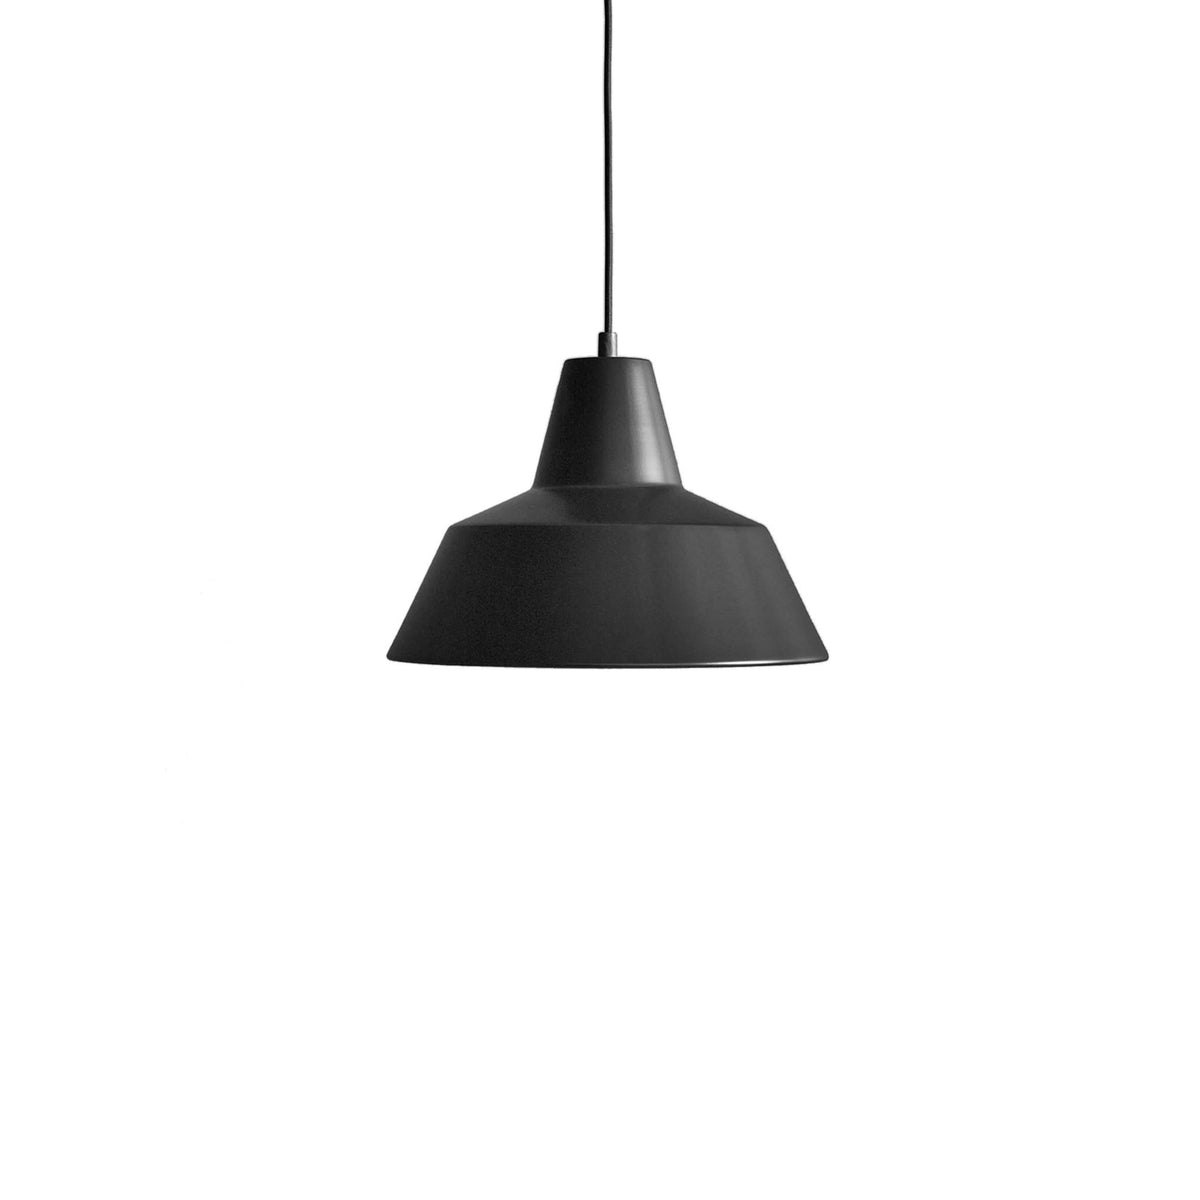 Made by Hand Workshop W3 Pendant in Matte Black by A Wedel Madsen